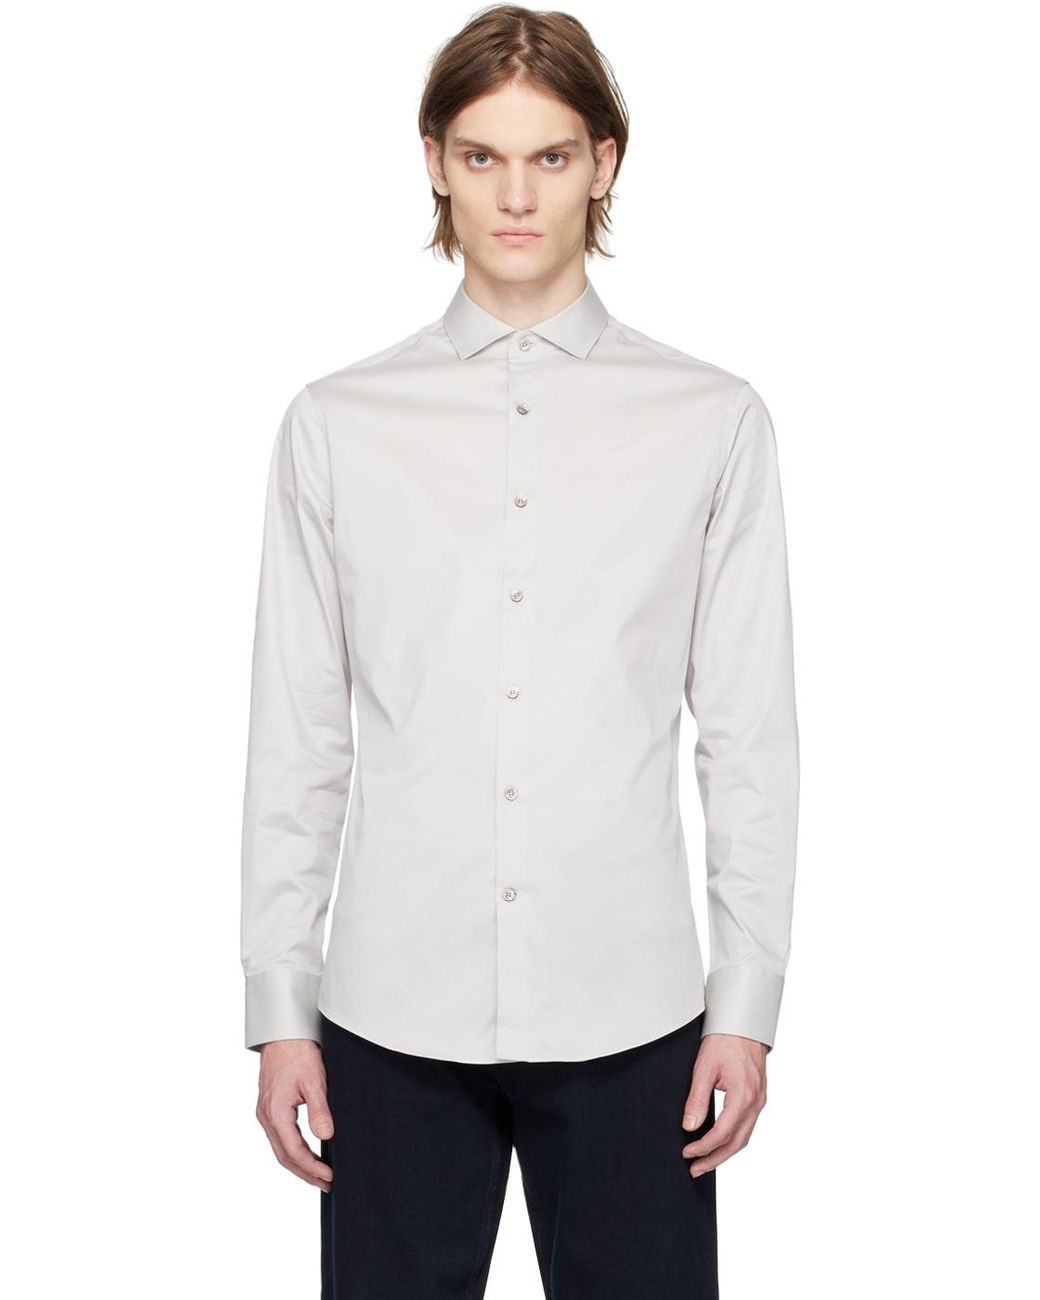 Tiger Of Sweden Farrell 5 Shirt in White for Men | Lyst Canada